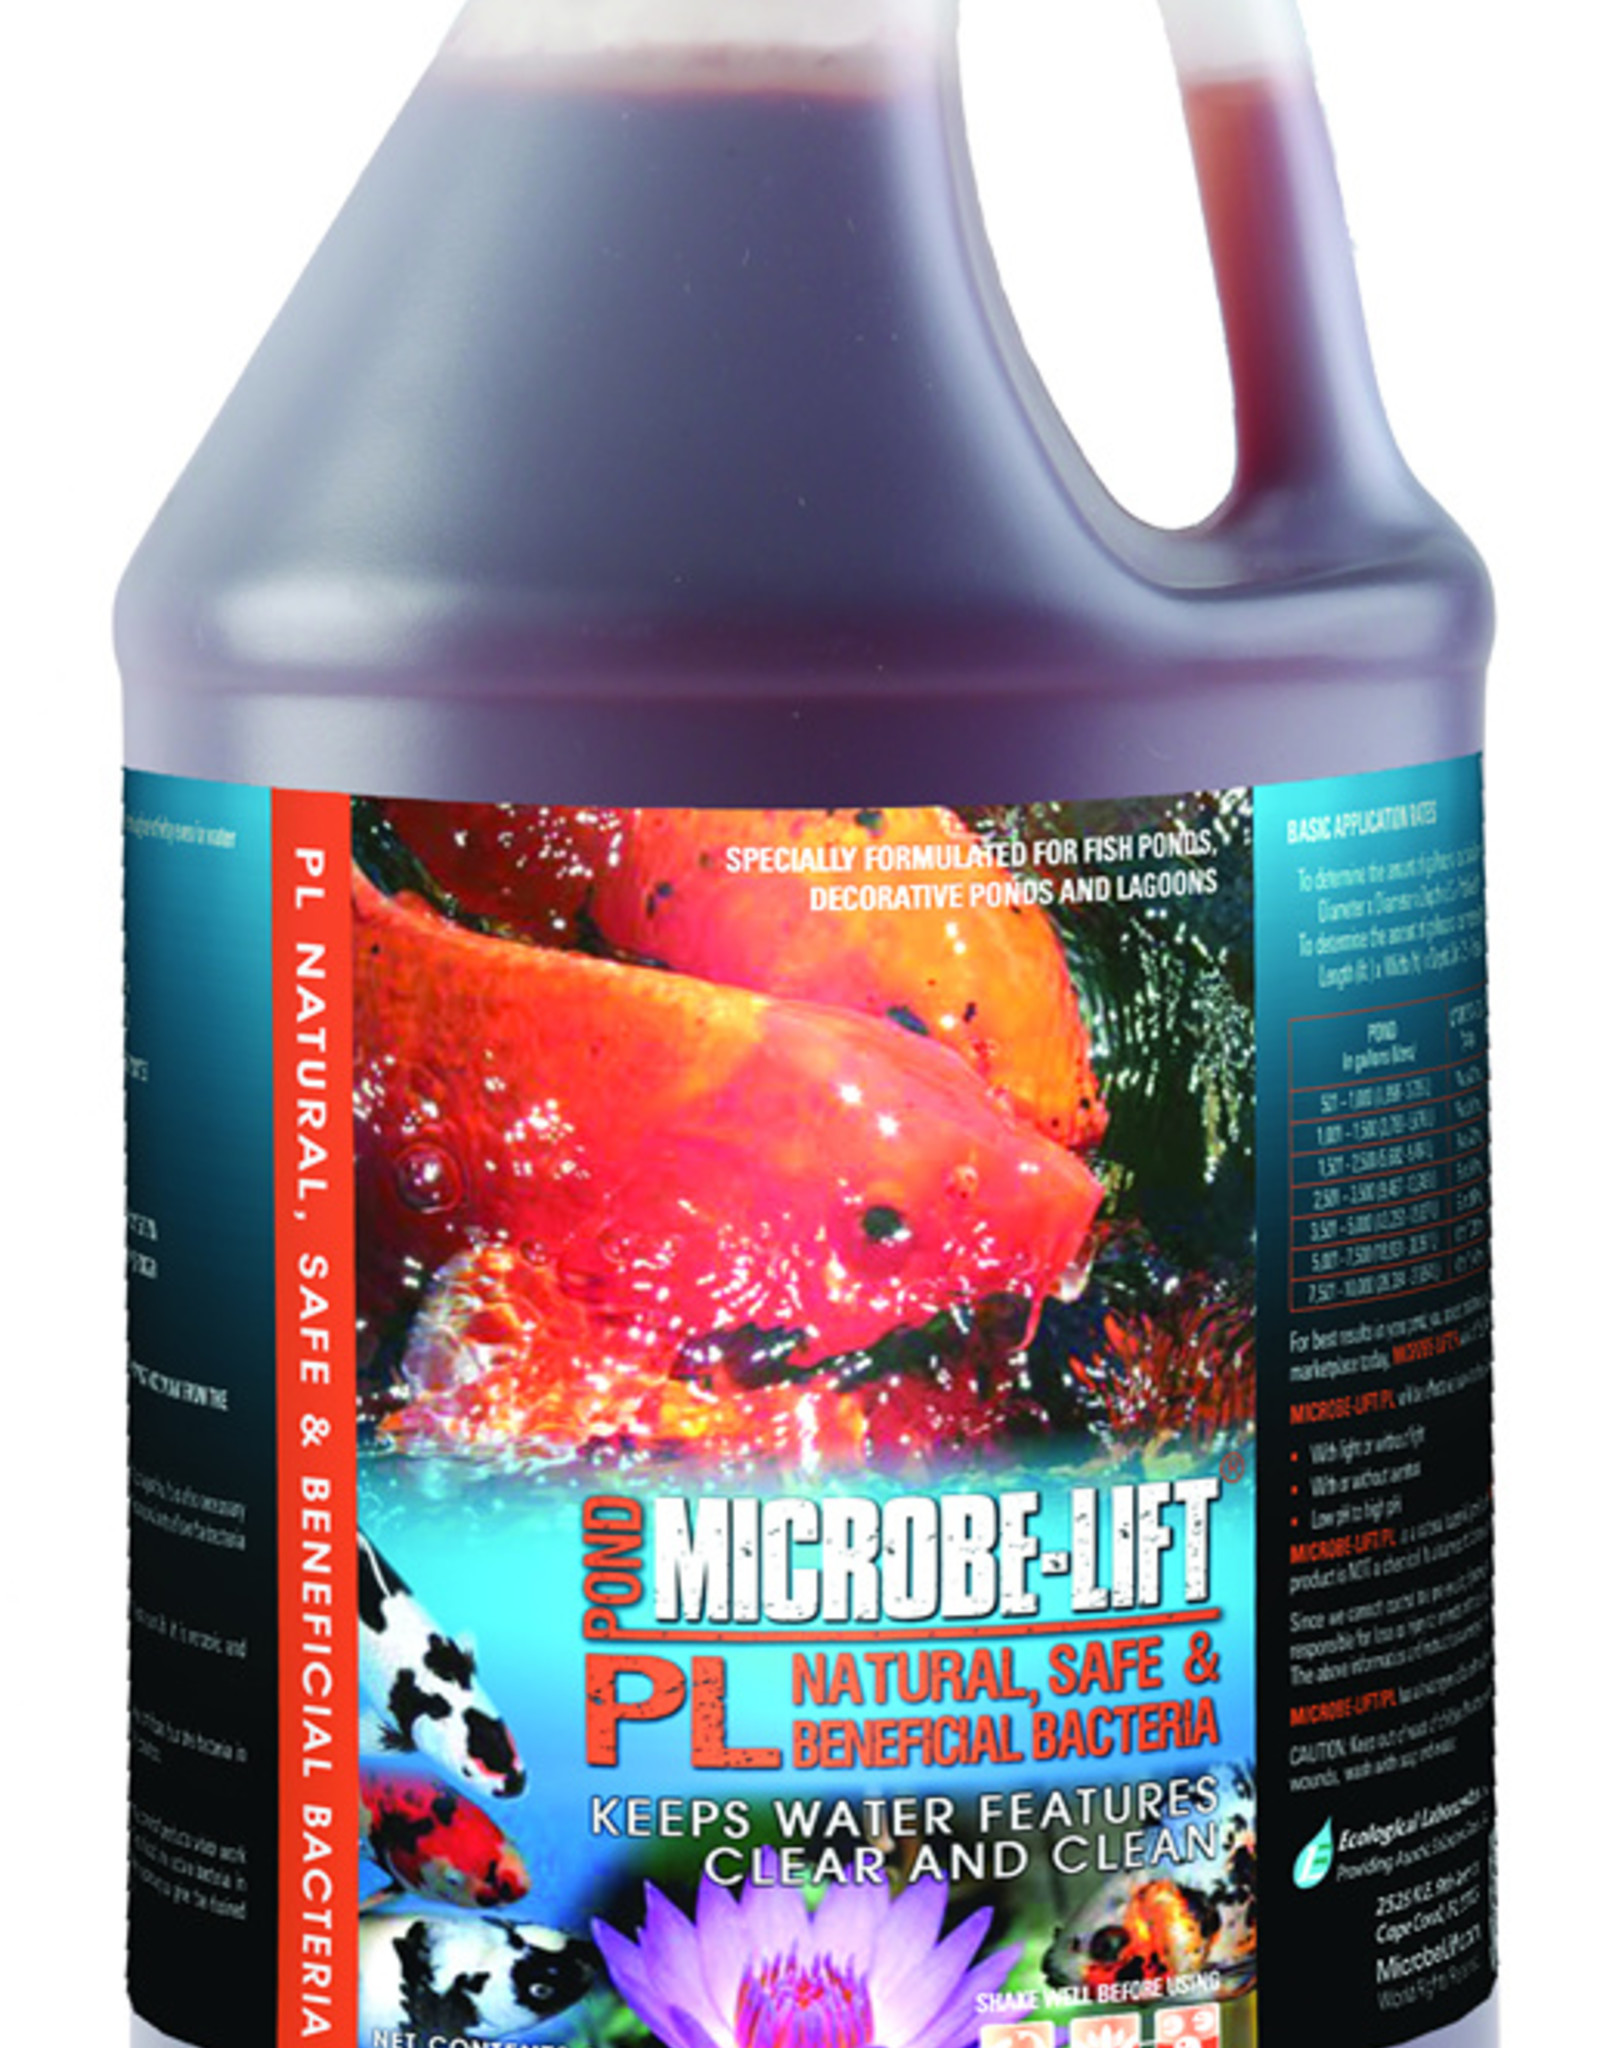 ECOLOGICAL LABS MICROBE LIFT PL 1 GALLON